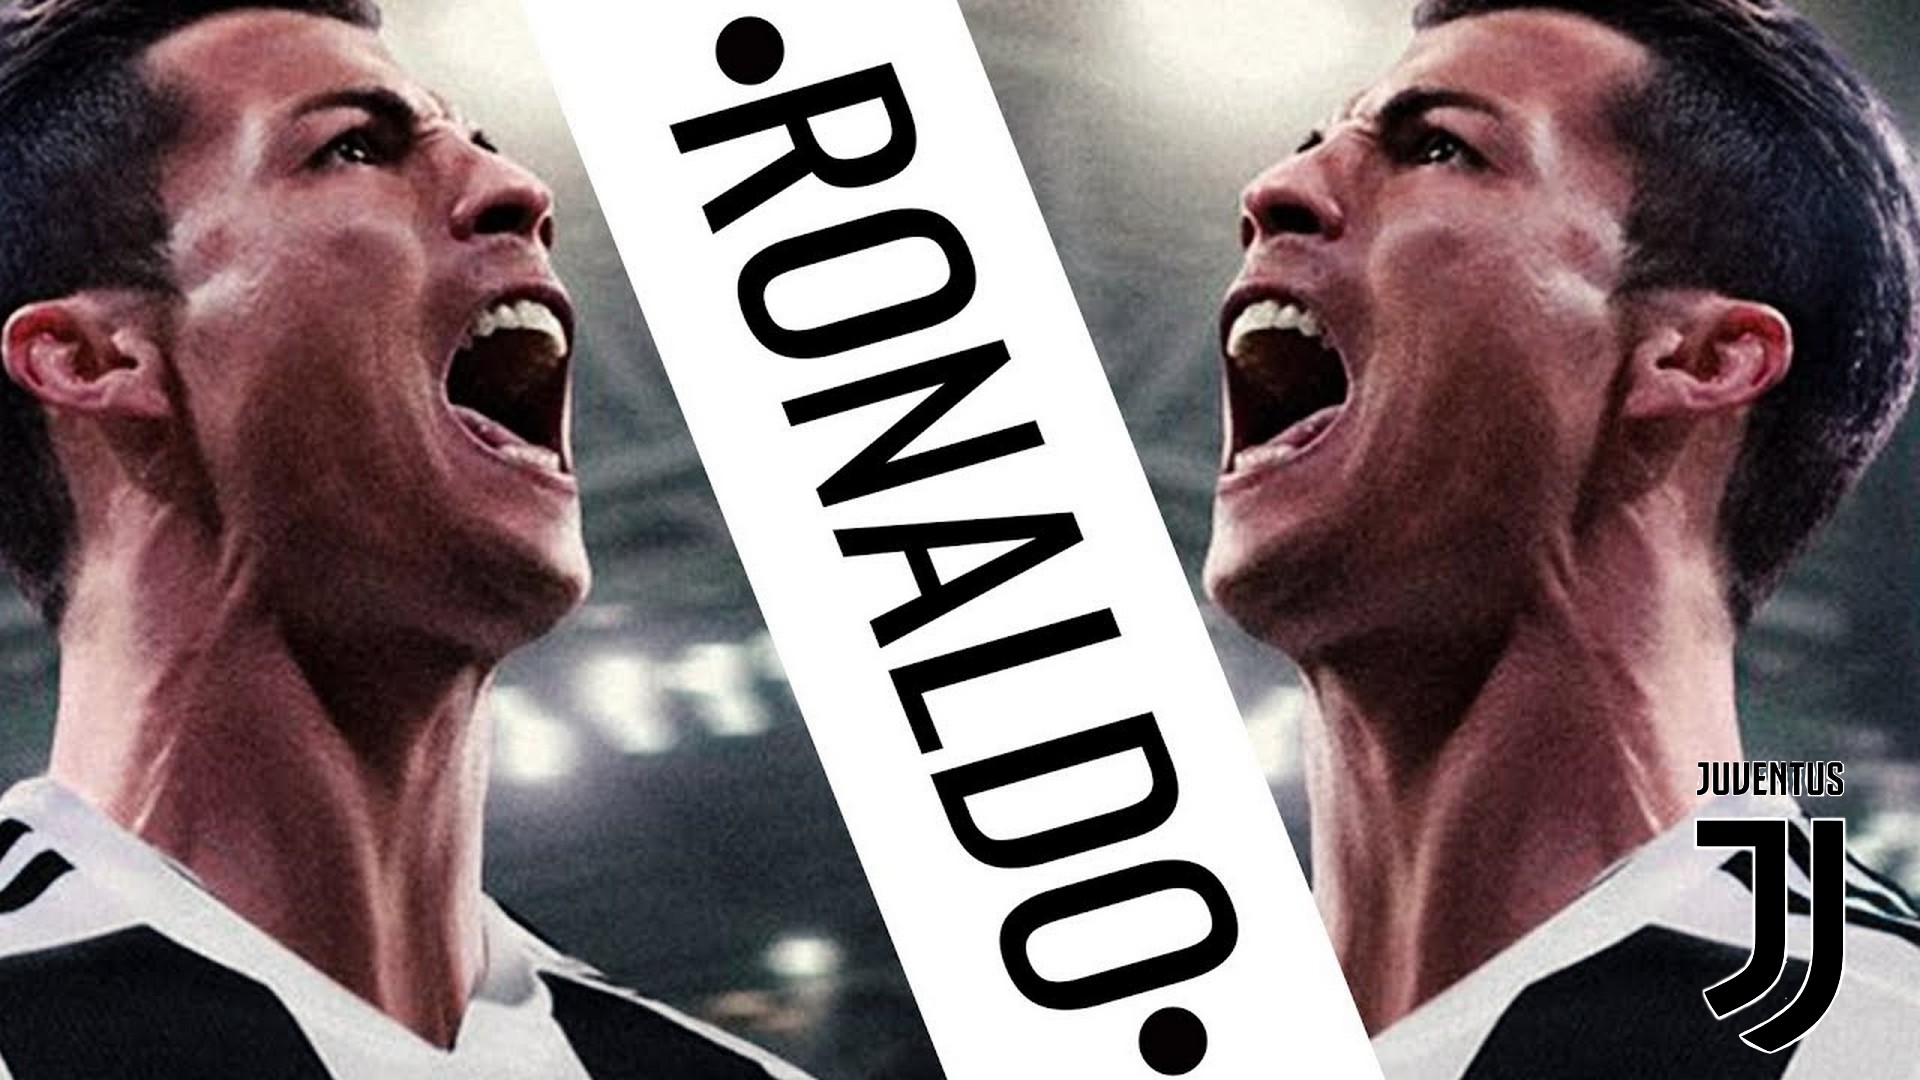 Wallpapers HD Cristiano Ronaldo Juve With Resolution 1920X1080 pixel. You can make this wallpaper for your Mac or Windows Desktop Background, iPhone, Android or Tablet and another Smartphone device for free